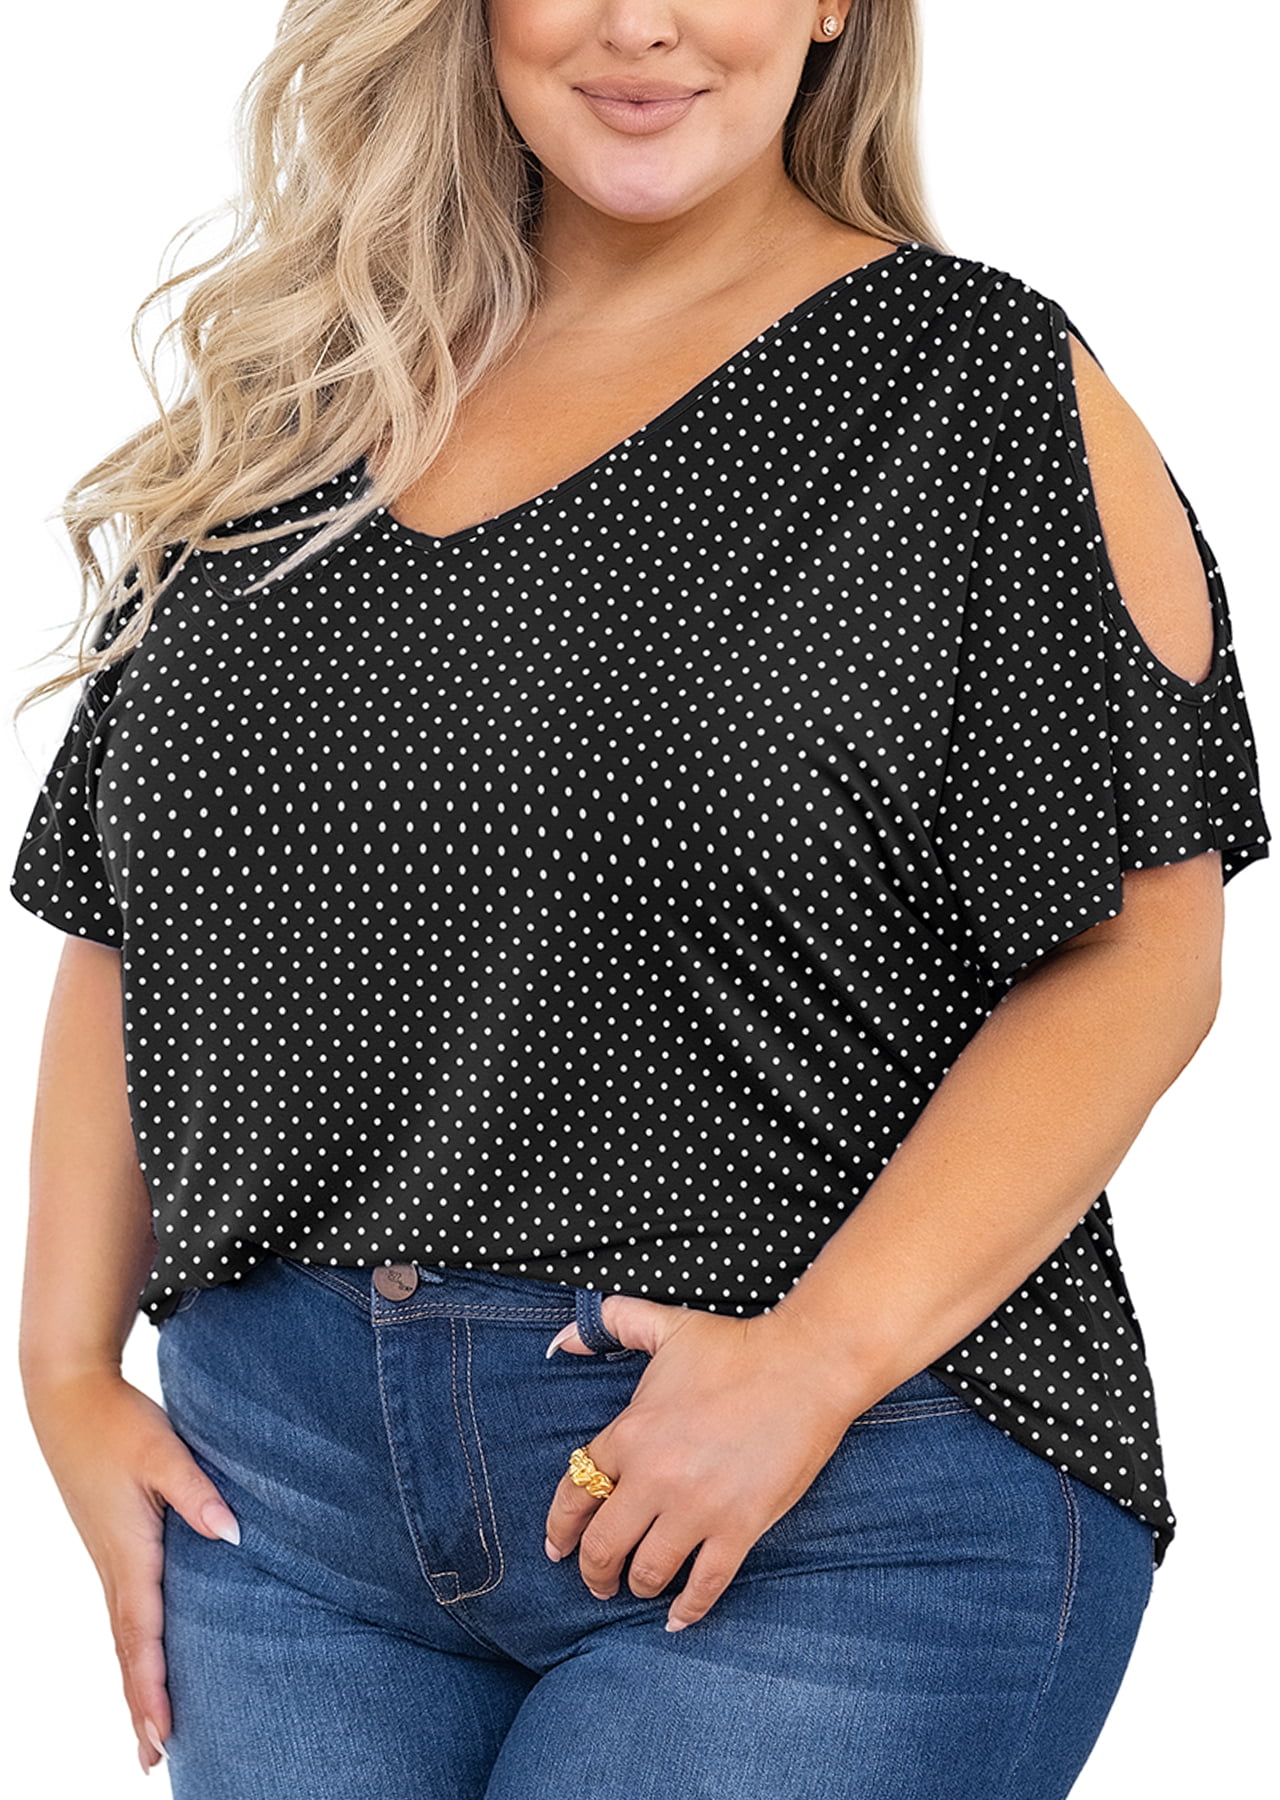 Plus Size Lace Plus Size Black Blouse For Women Sexy, Loose Fit, Cold  Shoulder, Perfect For Casual Summer Wear In Purple, Wine, And Black From  Caixuku, $24.15